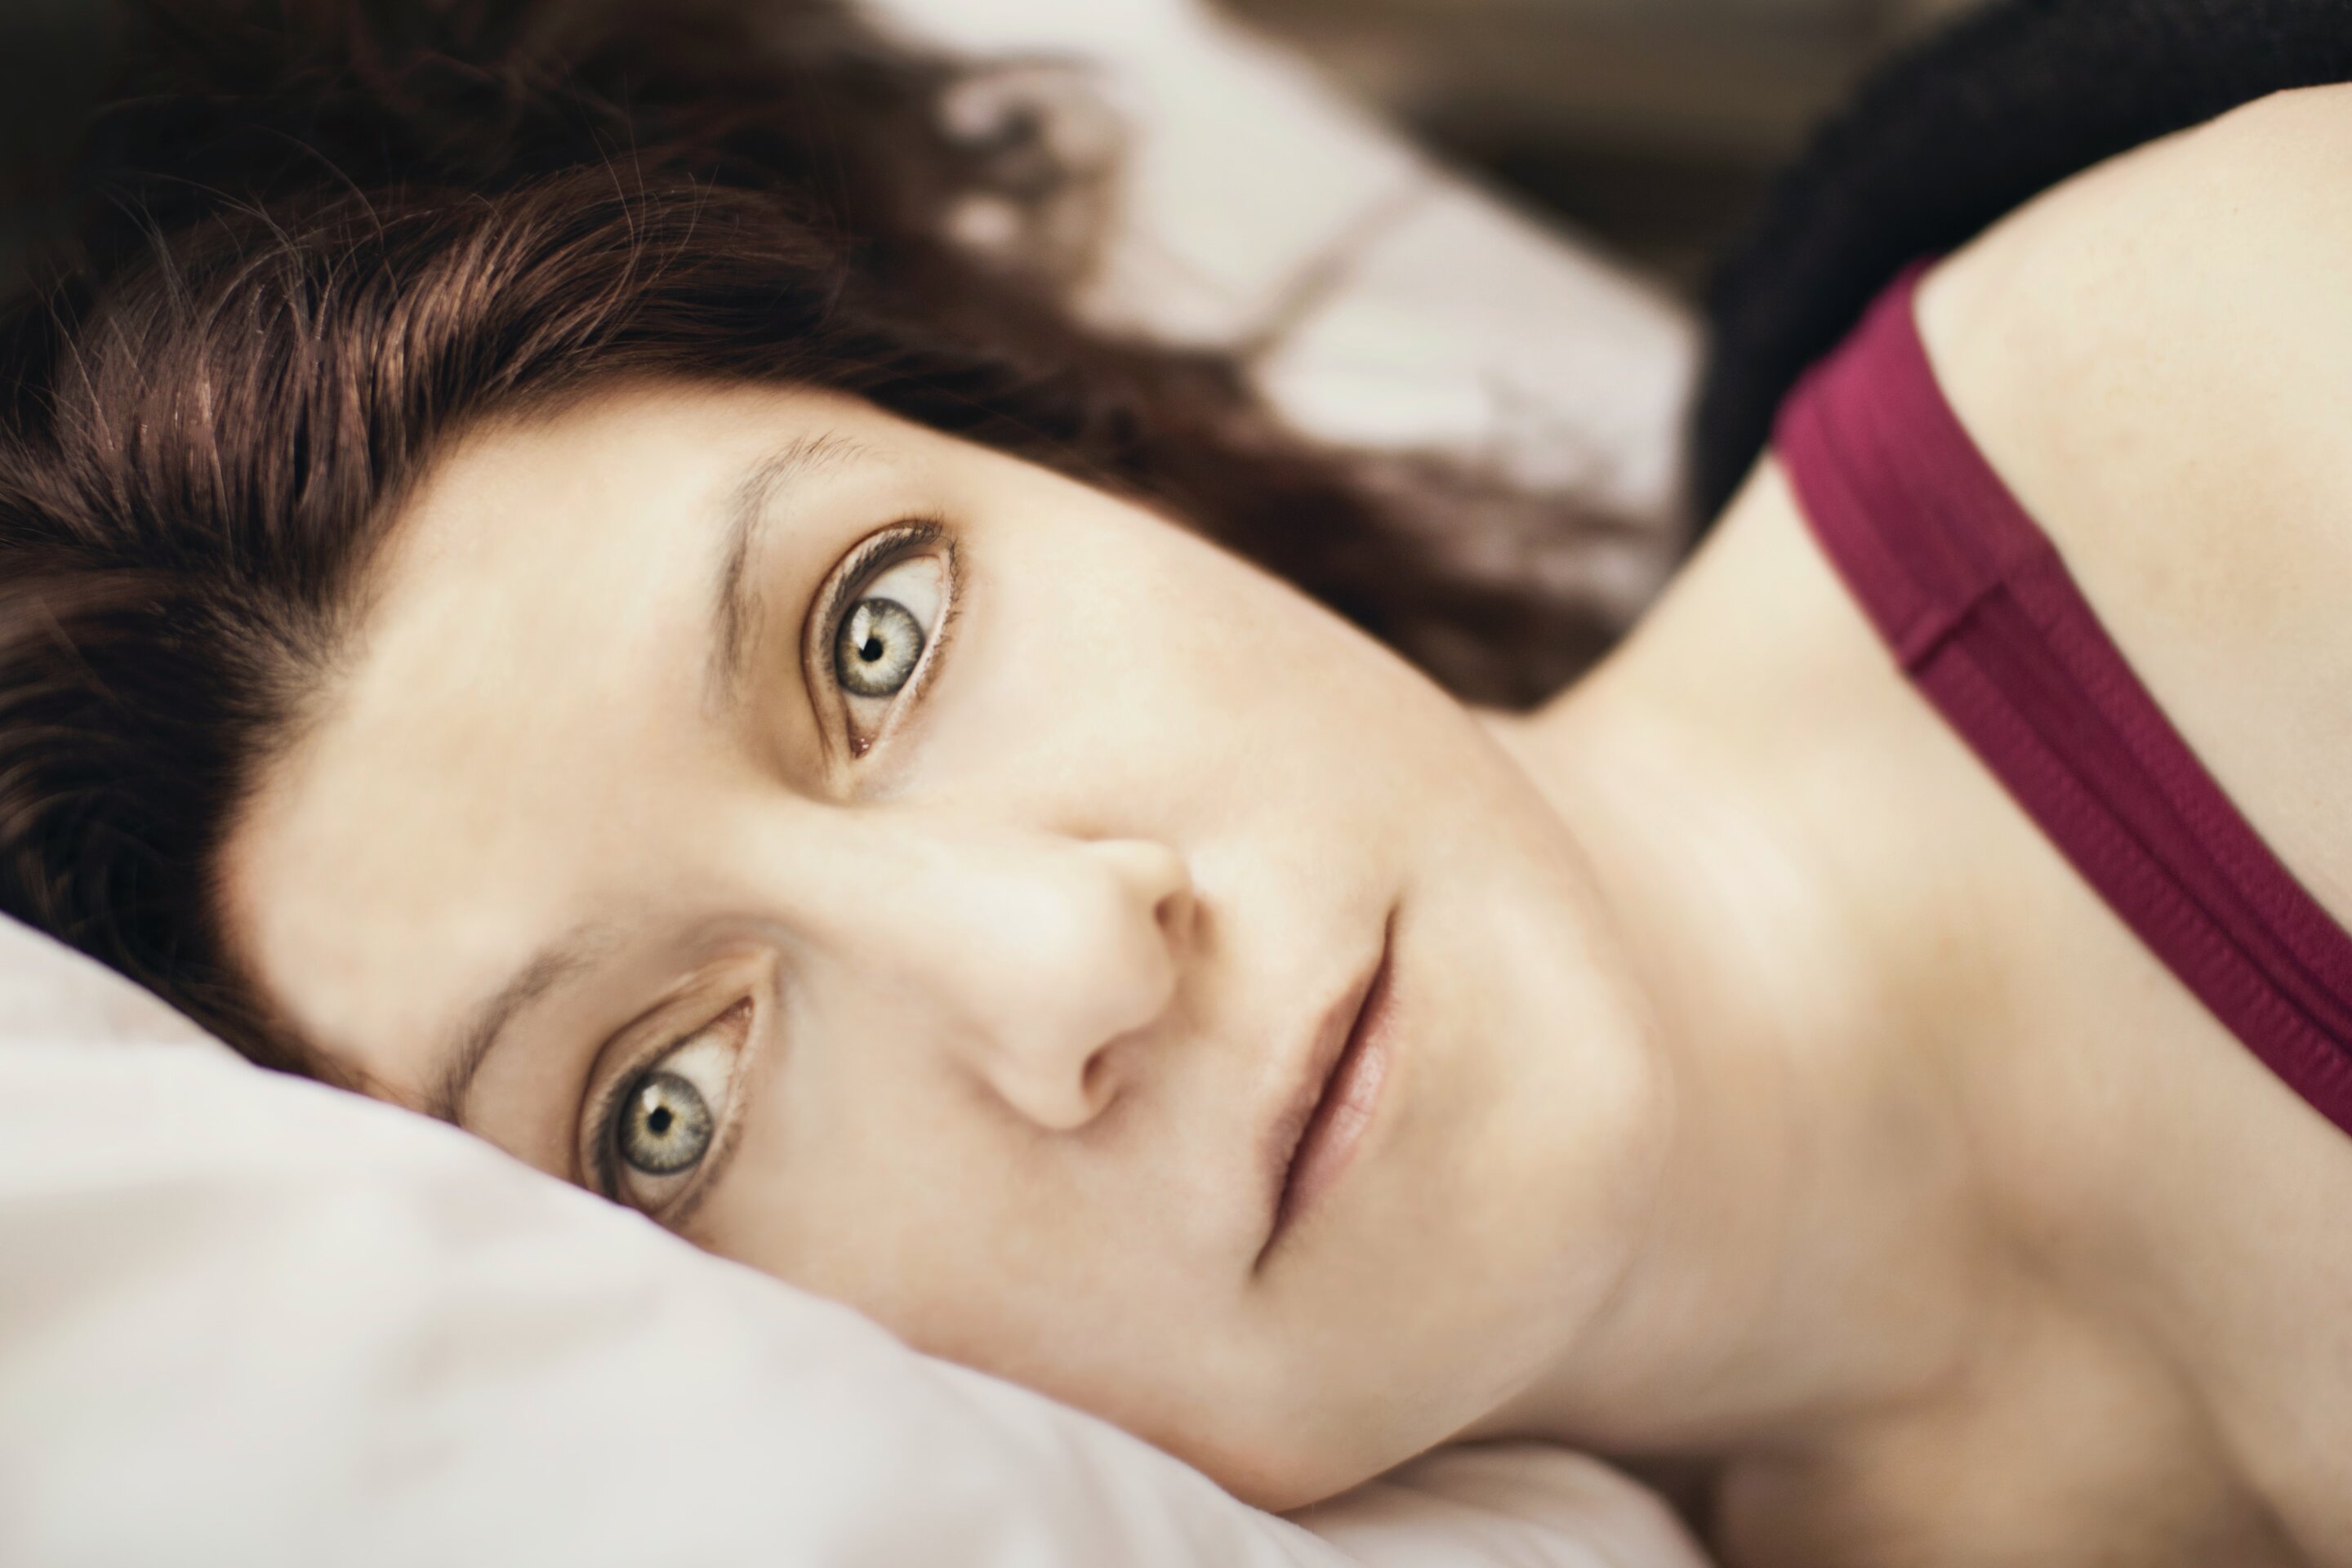 #Study finds mild COVID-19 infections make insomnia more likely, especially in people with anxiety or depression